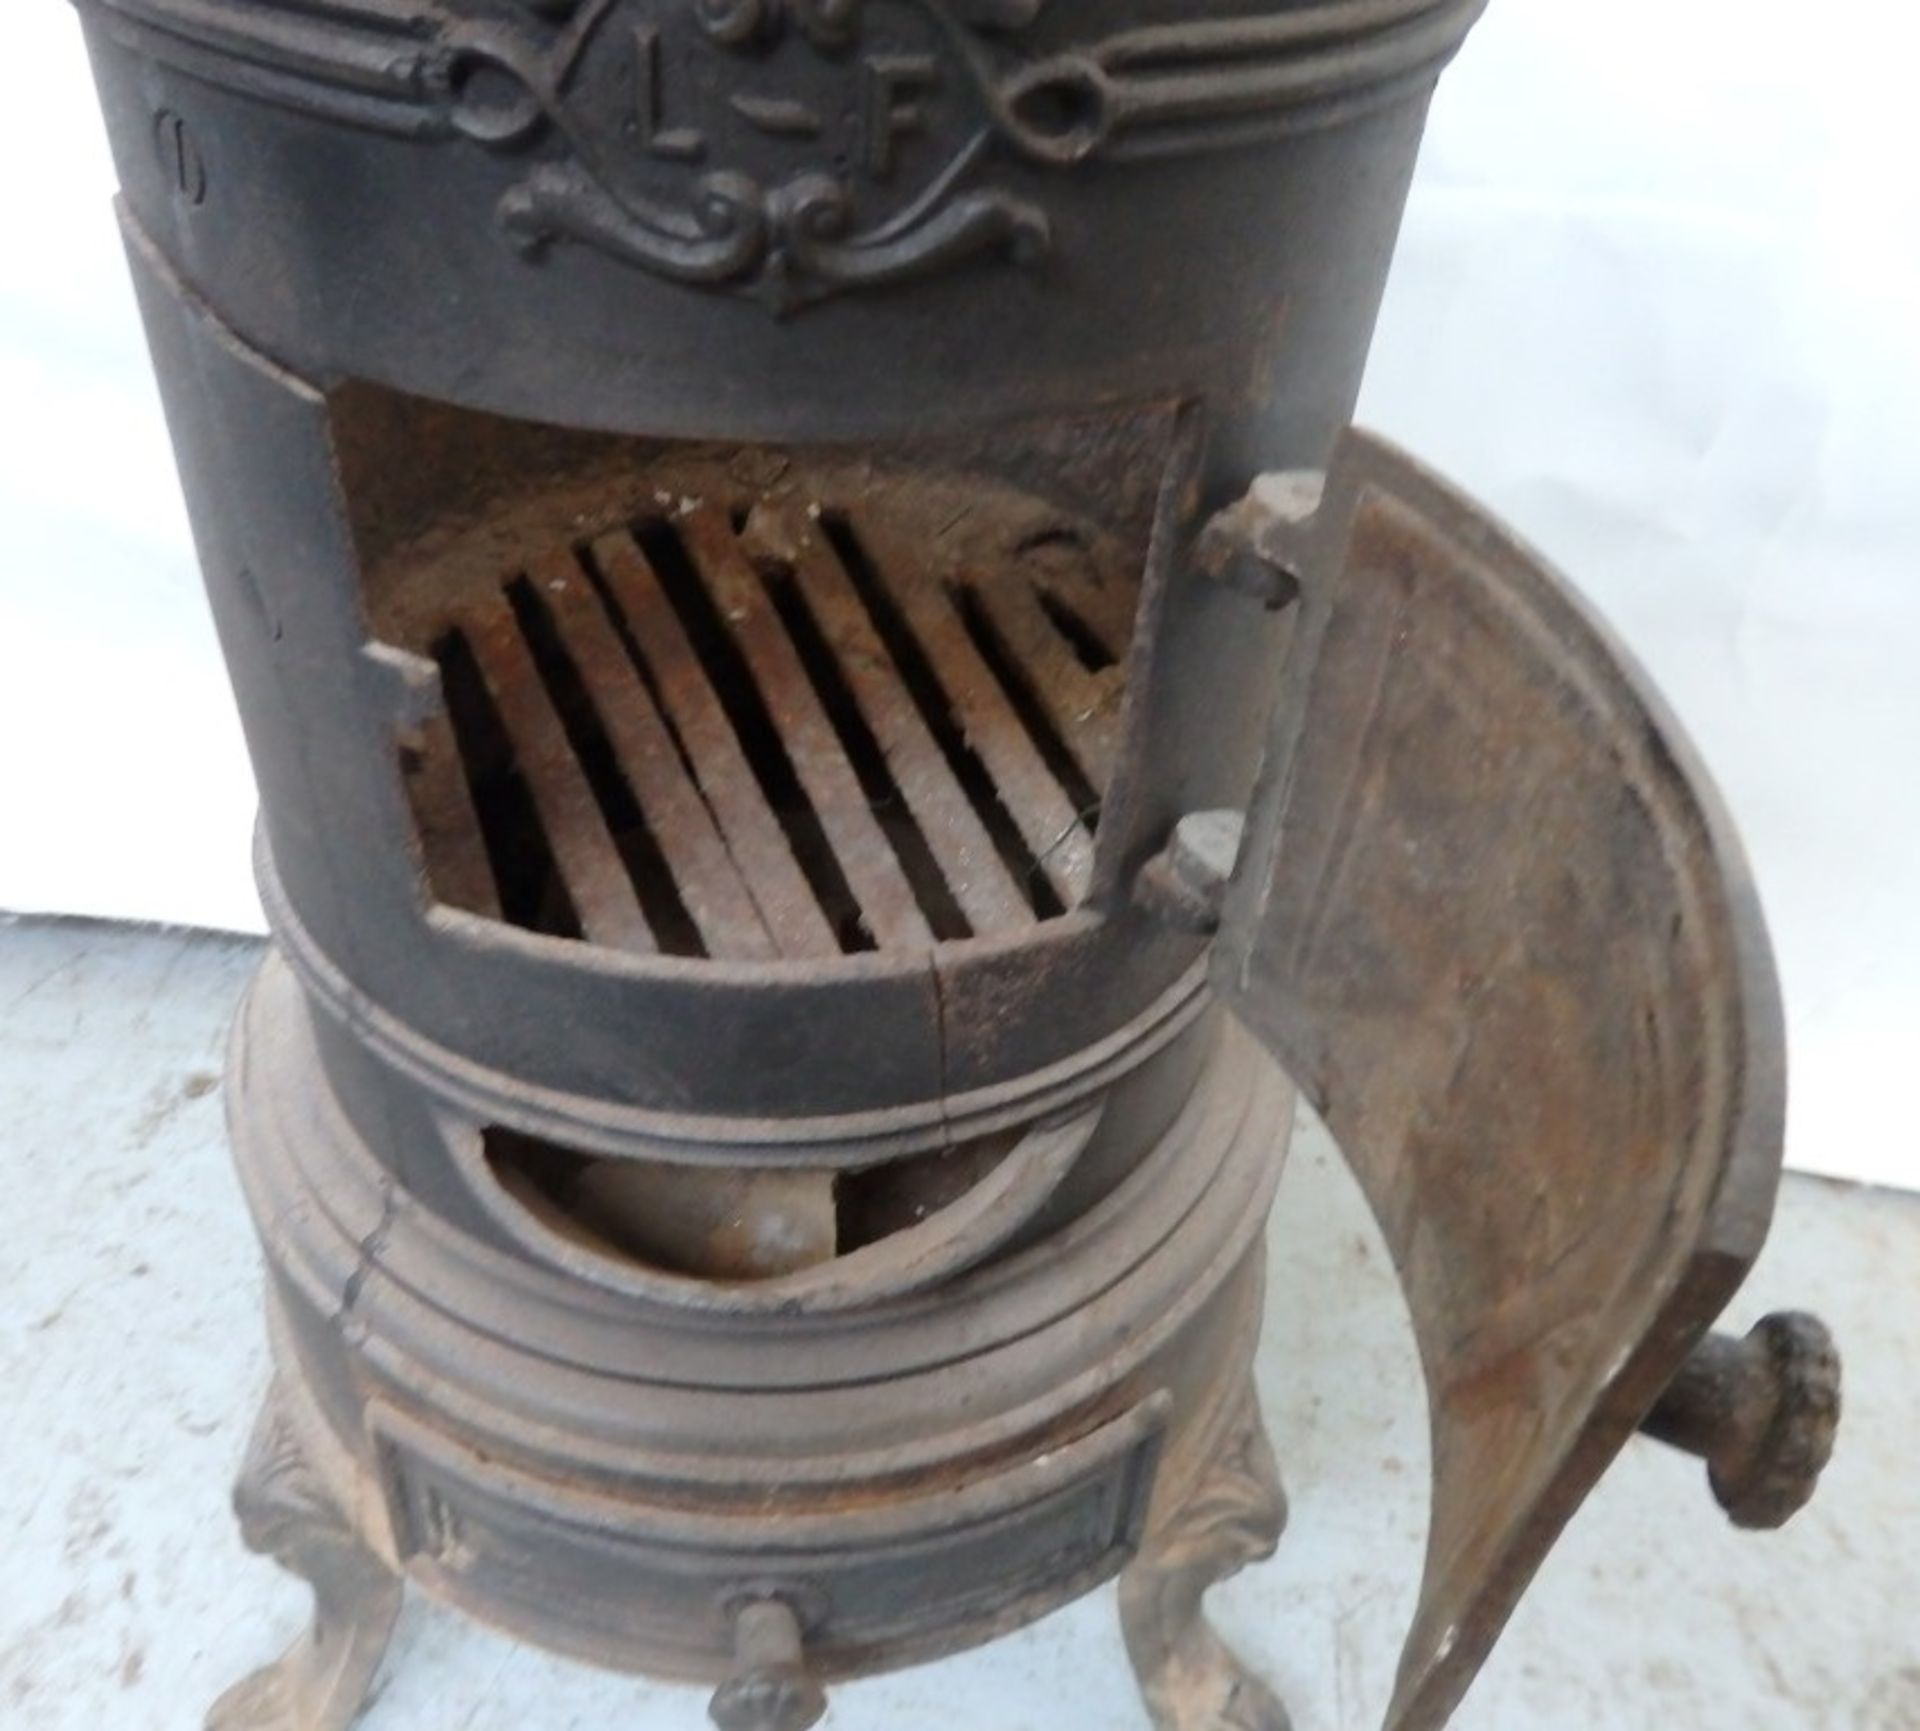 1 x Reclaimed Antique Cast Iron Potbelly Wood Burner / Stove - Dimensions: H61, Diameter 30cm - - Image 7 of 9